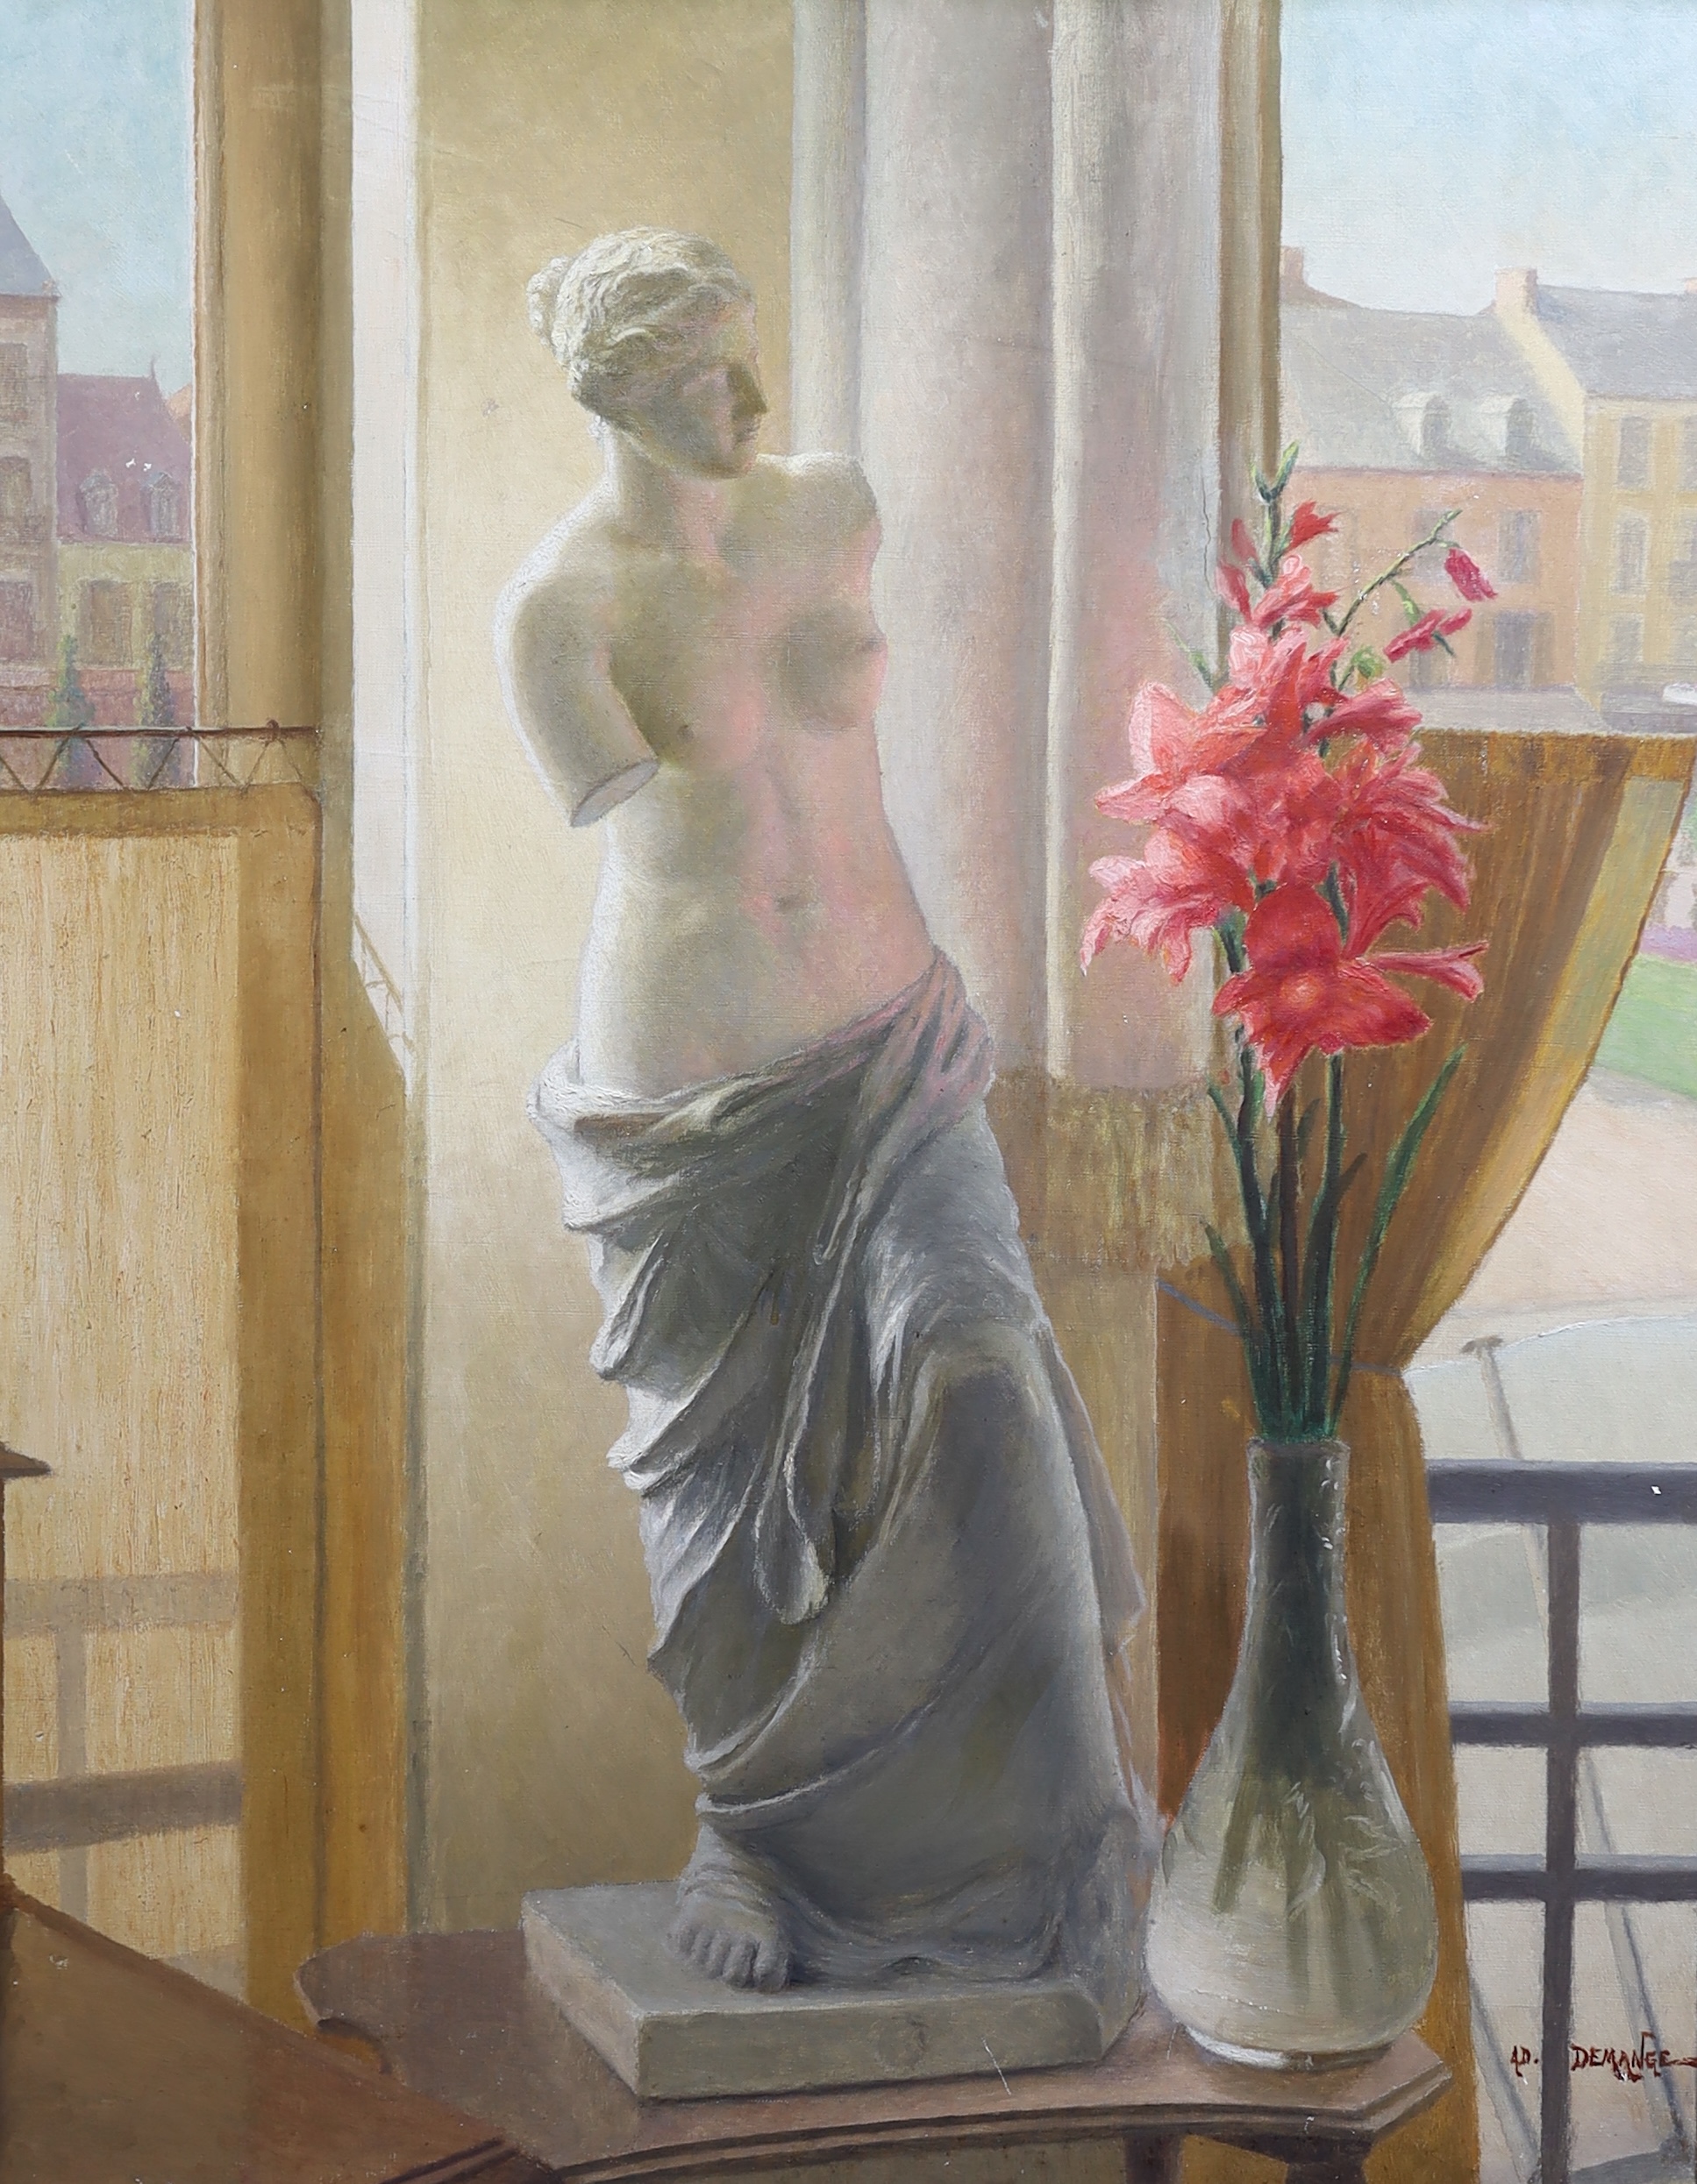 Adolphe Demange (French, 1857-1928), oil on canvas, 'Venus de Milo sculpture and gladioli in the window', signed, 97 x 77cm. Condition - good